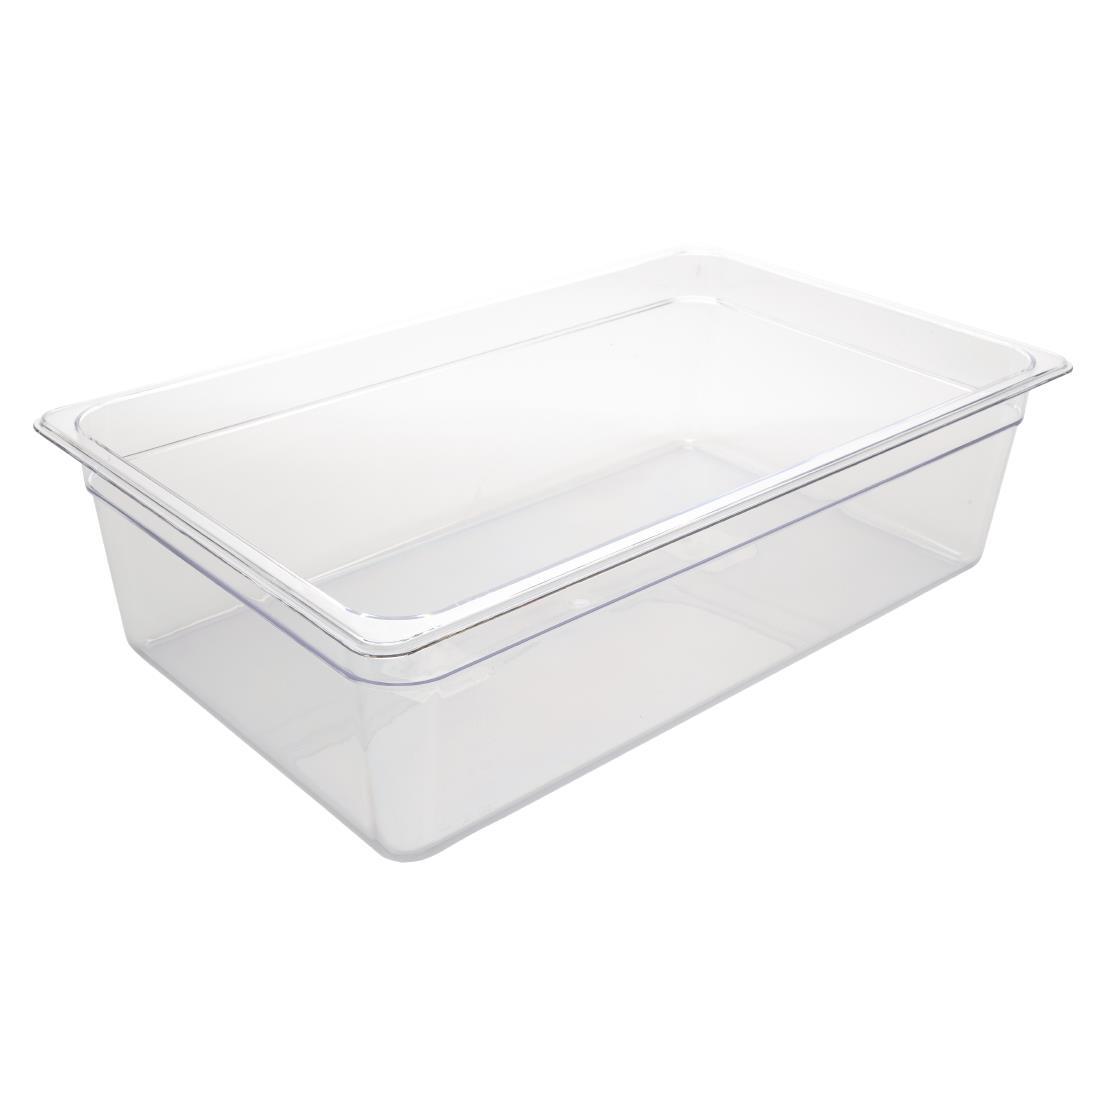 Vogue Polycarbonate 1/1 Gastronorm Container 150mm Clear - U226  - 1